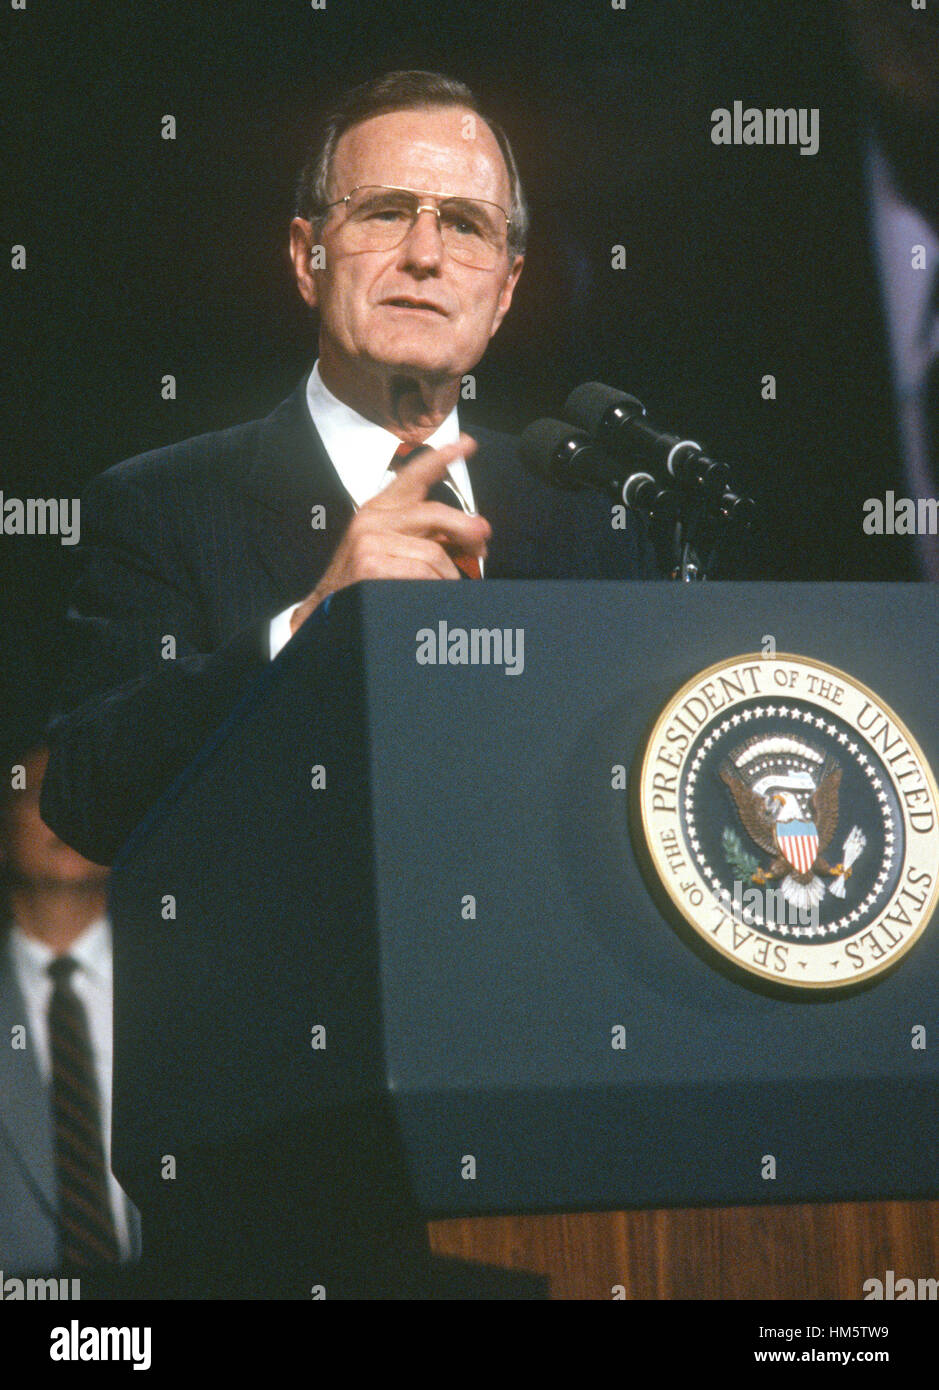 United States President George H.W. Bush makes remarks at the AFL-CIO convention in Washington, D.C. on November 15, 1989. Stock Photo